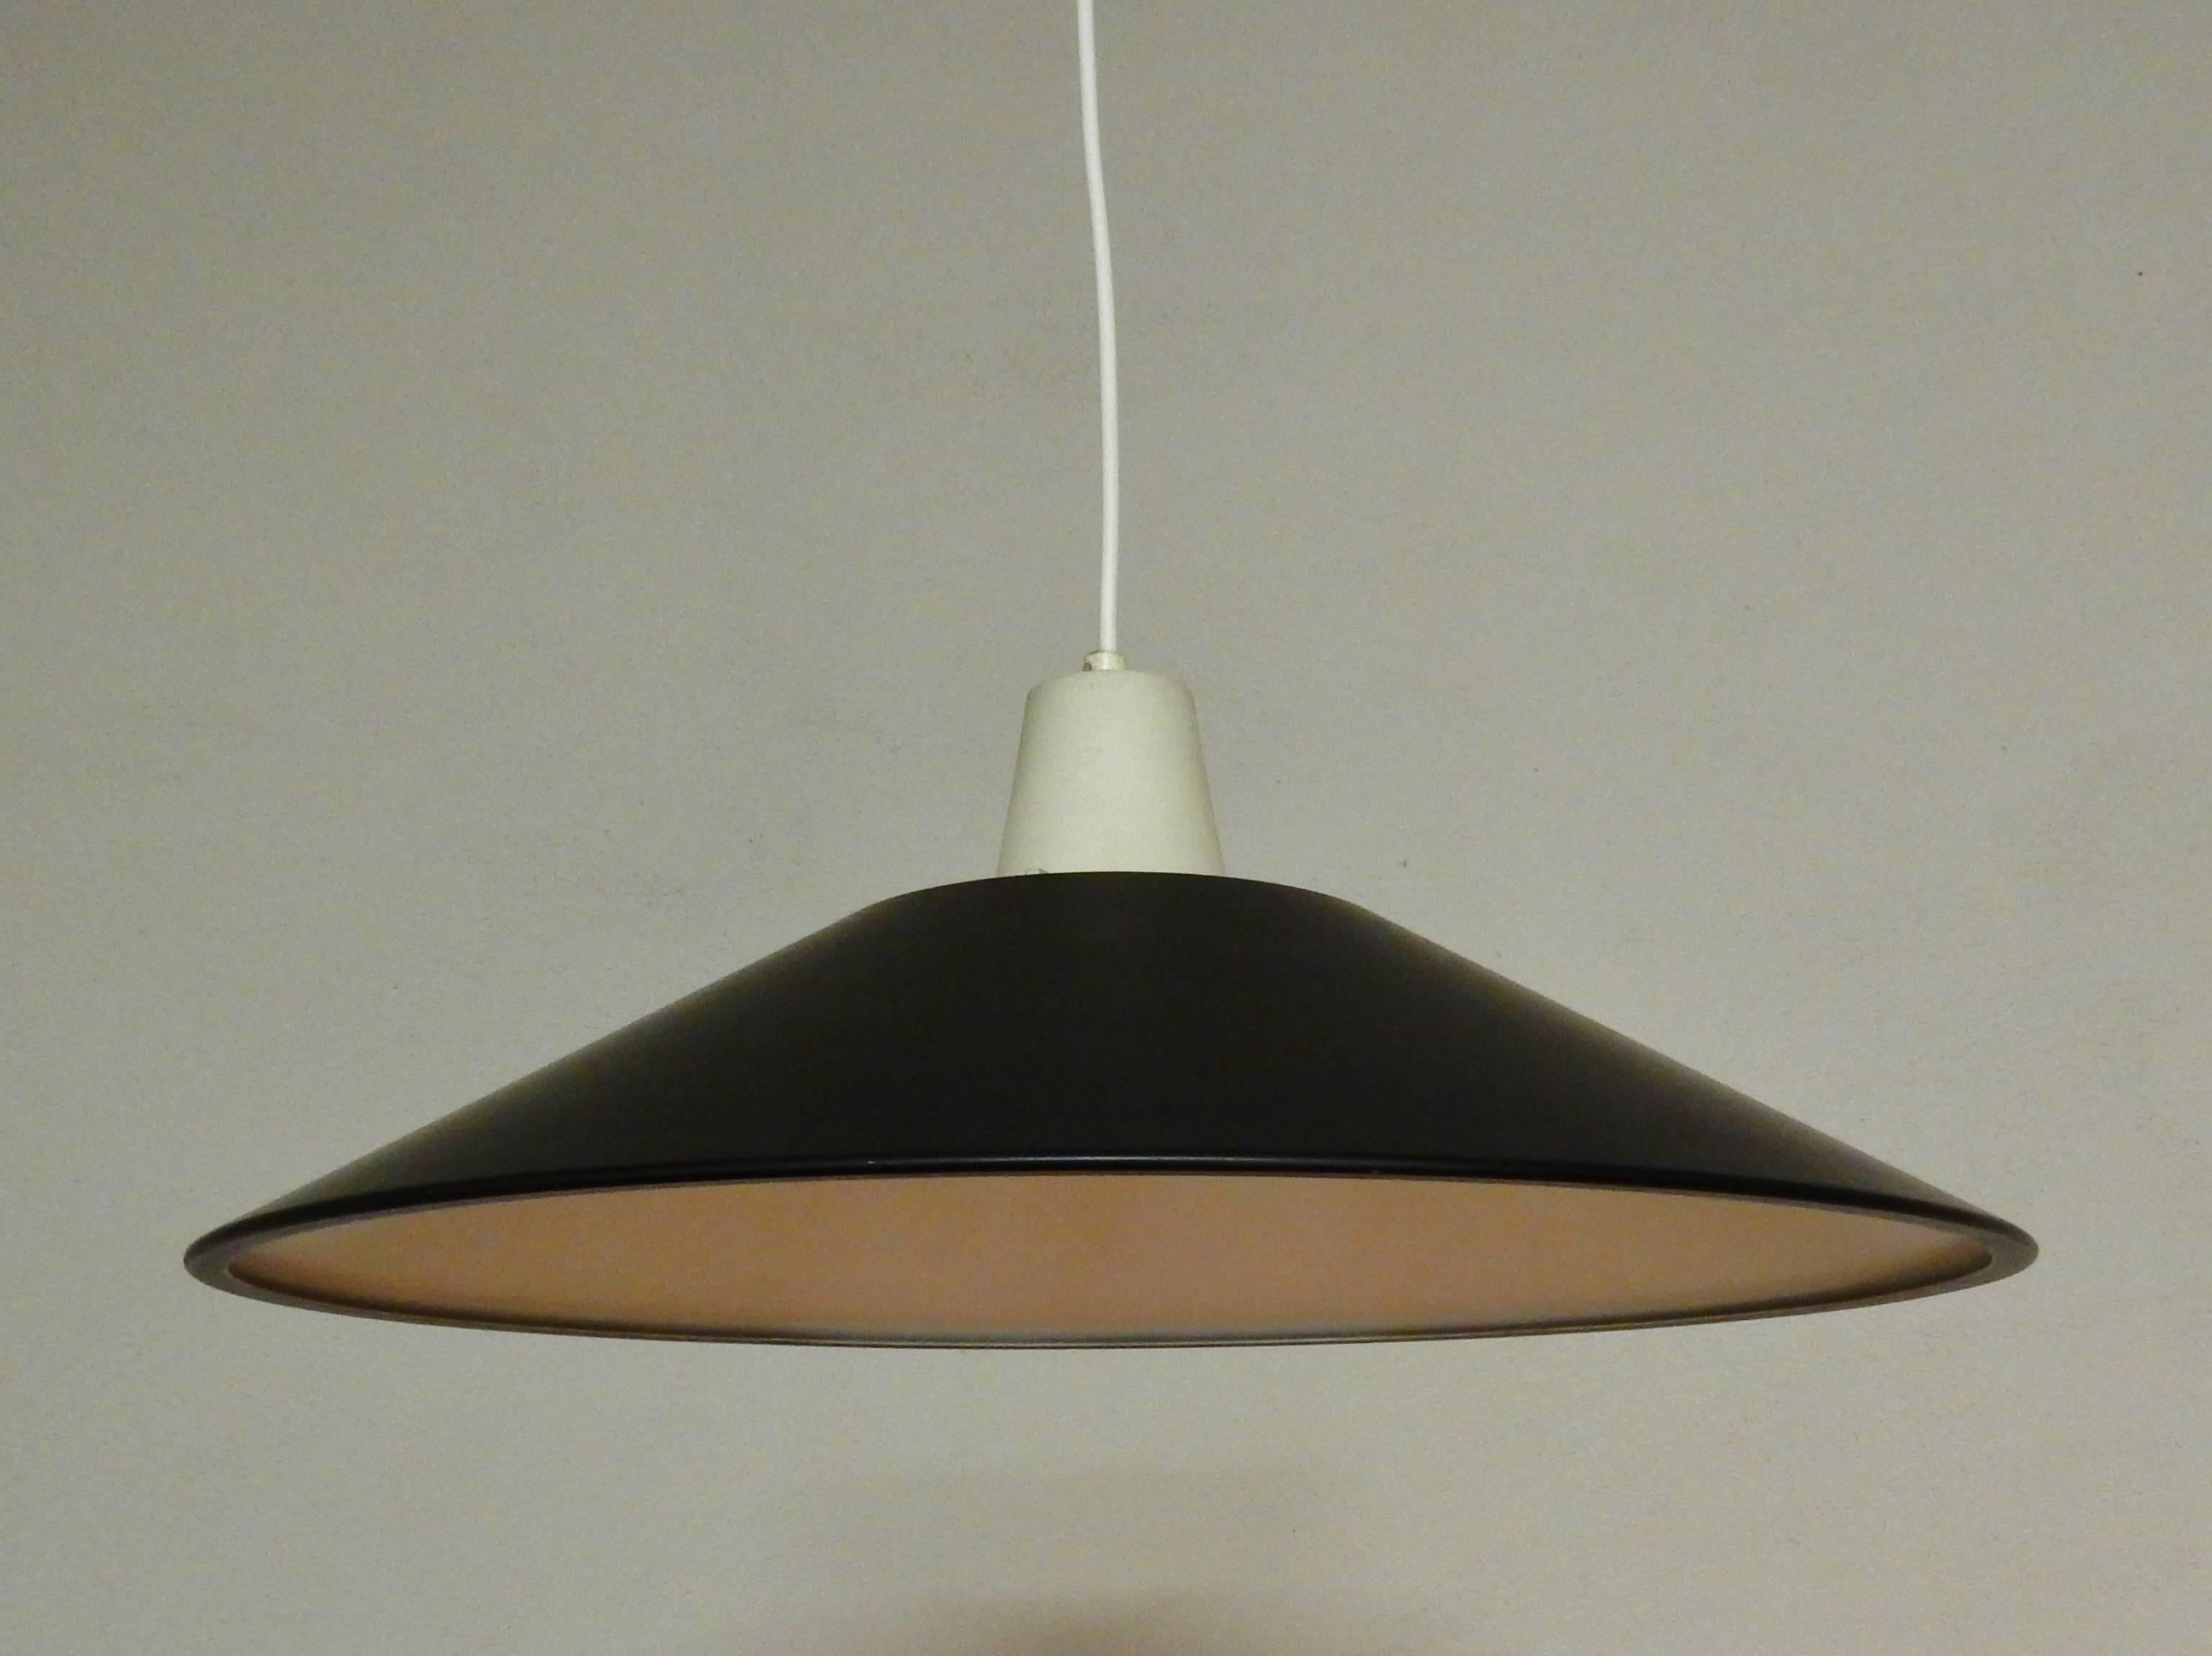 Mid-Century Modern Mid-Century Pendant Light in Black and White Lacquered Metal, 1950s-1960s For Sale